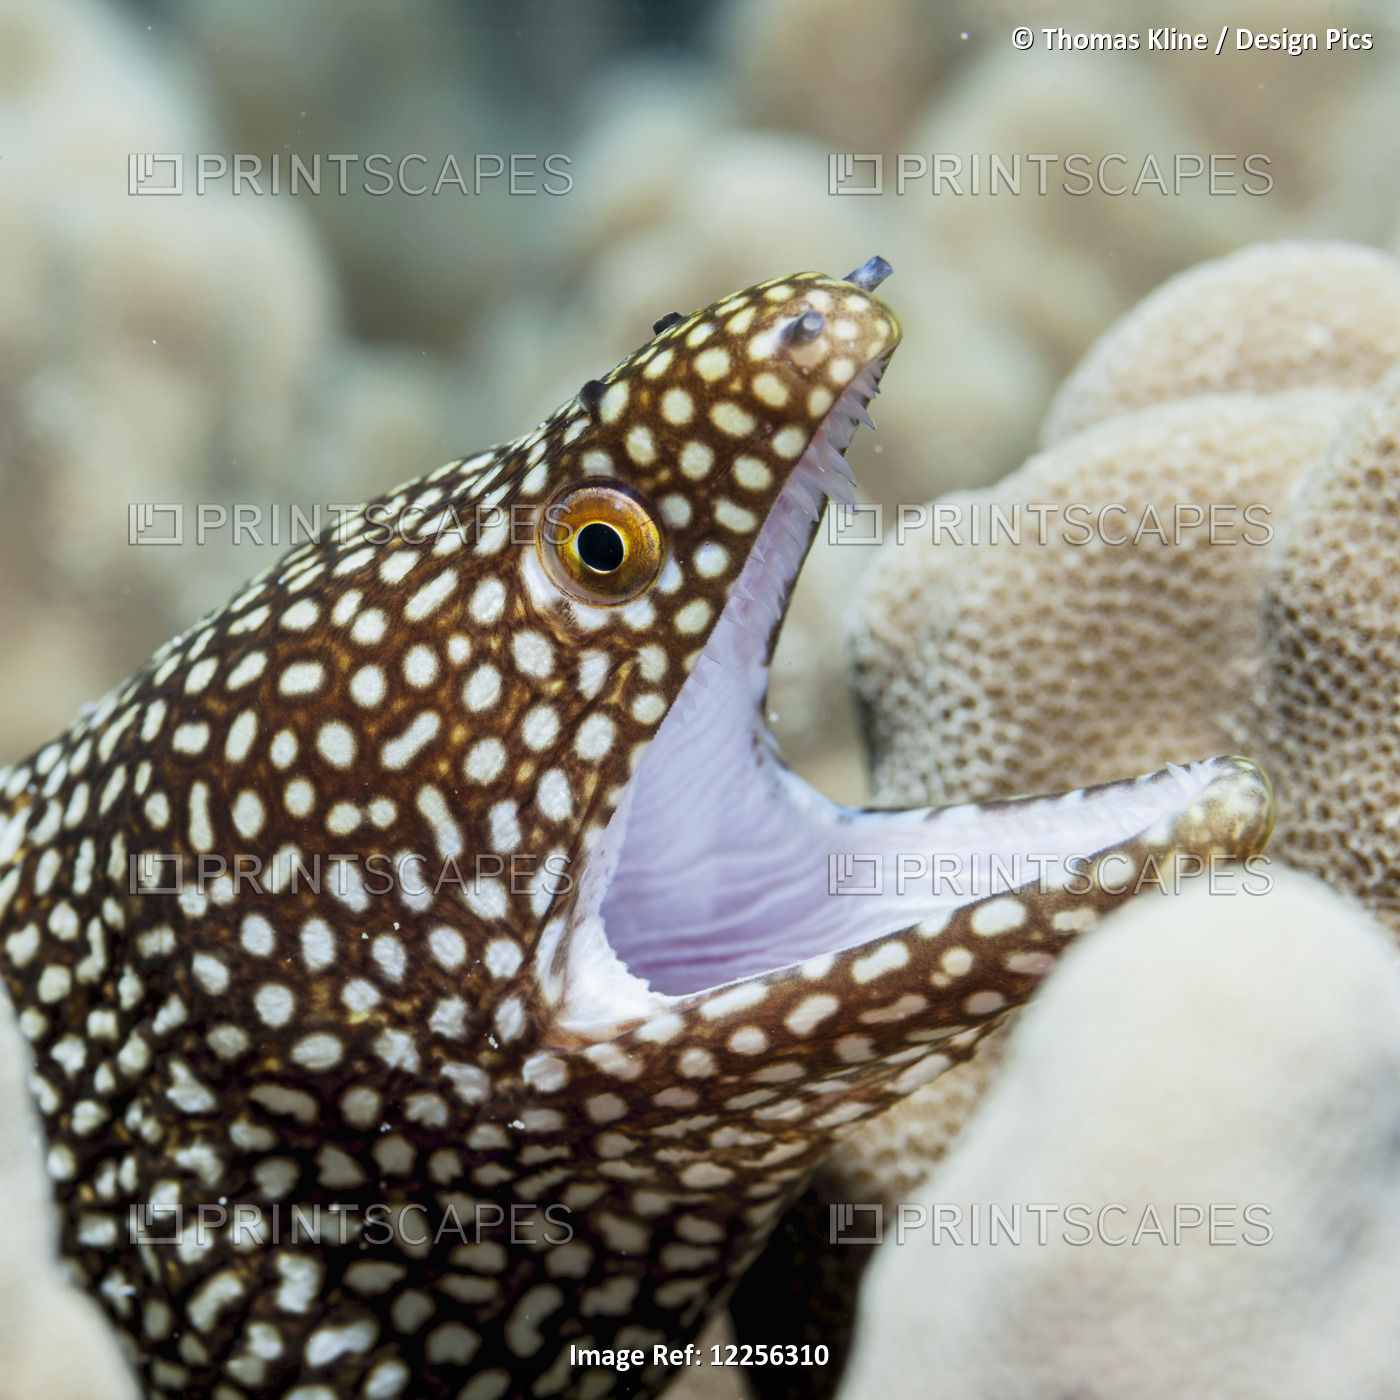 Sharp Teeth Can Be Seen In The Gaping Mouth Of This Whitemouth Moray Eel ...